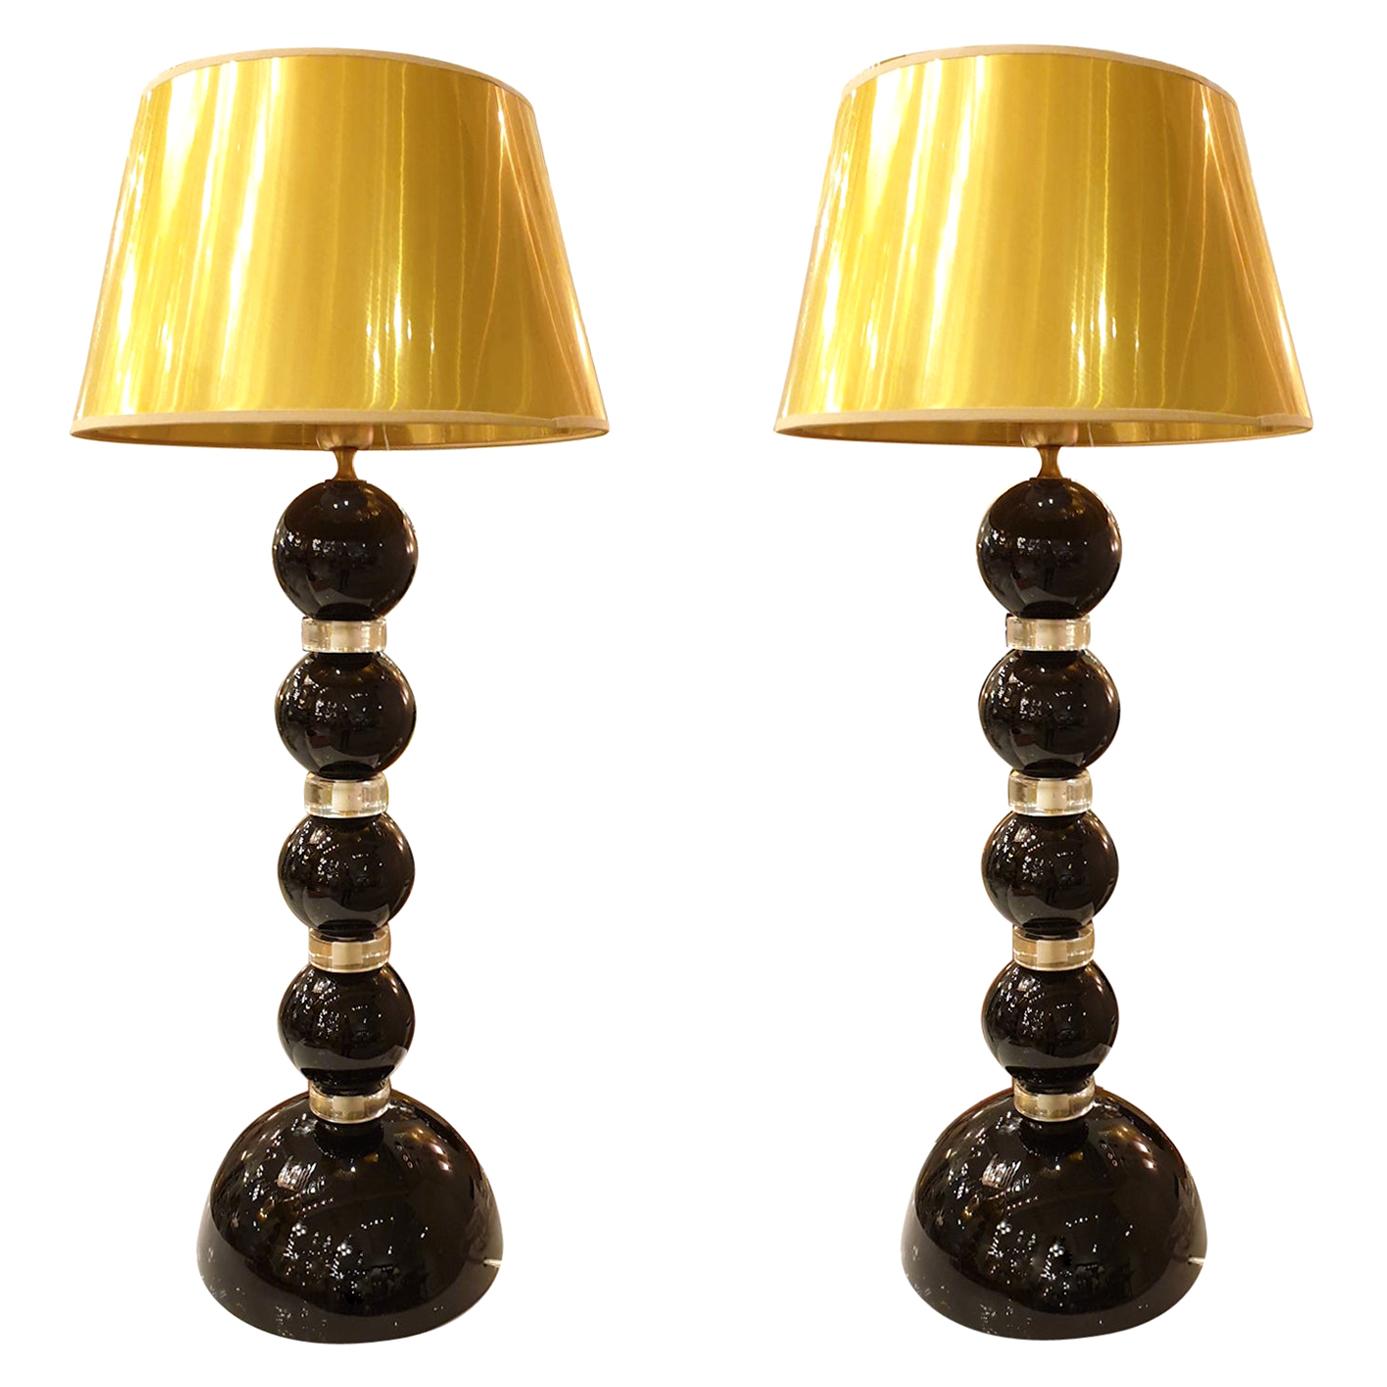 Pair of Large Mid-Century Modern Black and Gold Murano Glass Table Lamps, 1970s